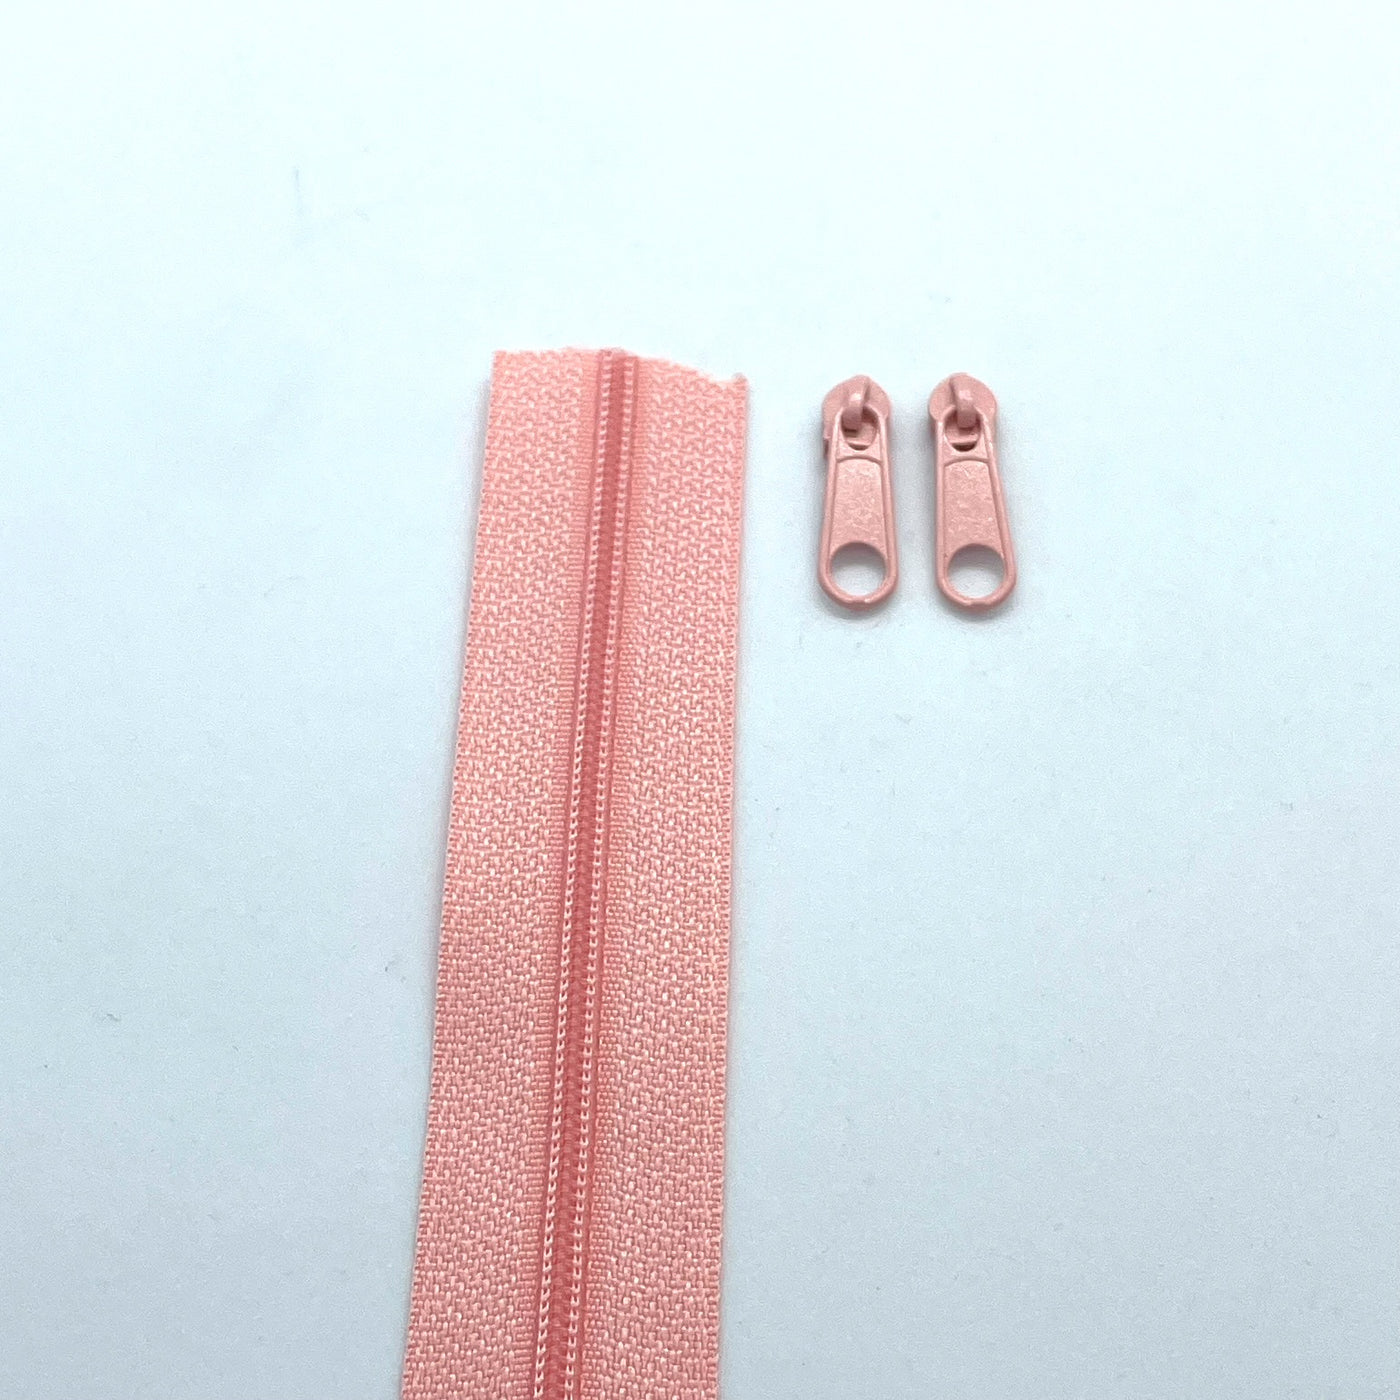 Photo of coral continuous zipper rolls in size 3, available in various colors. Matching sliders/zipper heads included at 2 per meter. Size 3 refers to the size of the coils when closed at 3mm